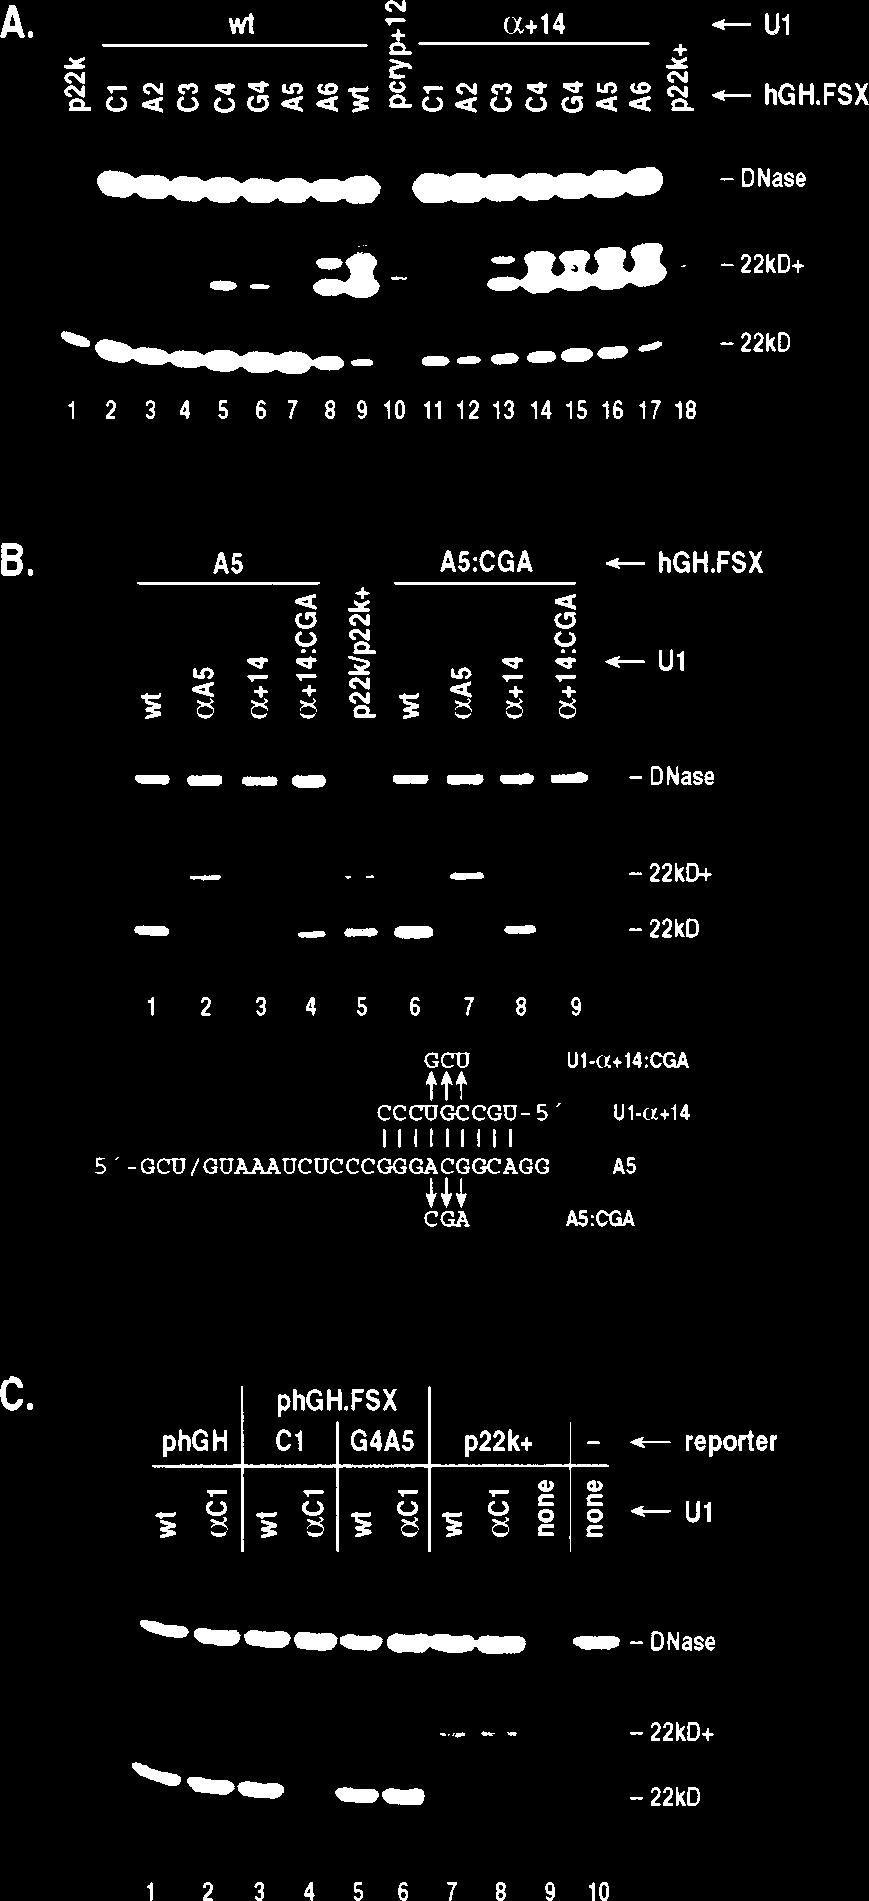 3014 HWANG AND COHEN MOL. CELL. BIOL. FIG. 2. Protein assays to distinguish IDX inclusion and skipping in transiently transfected 293 cells.